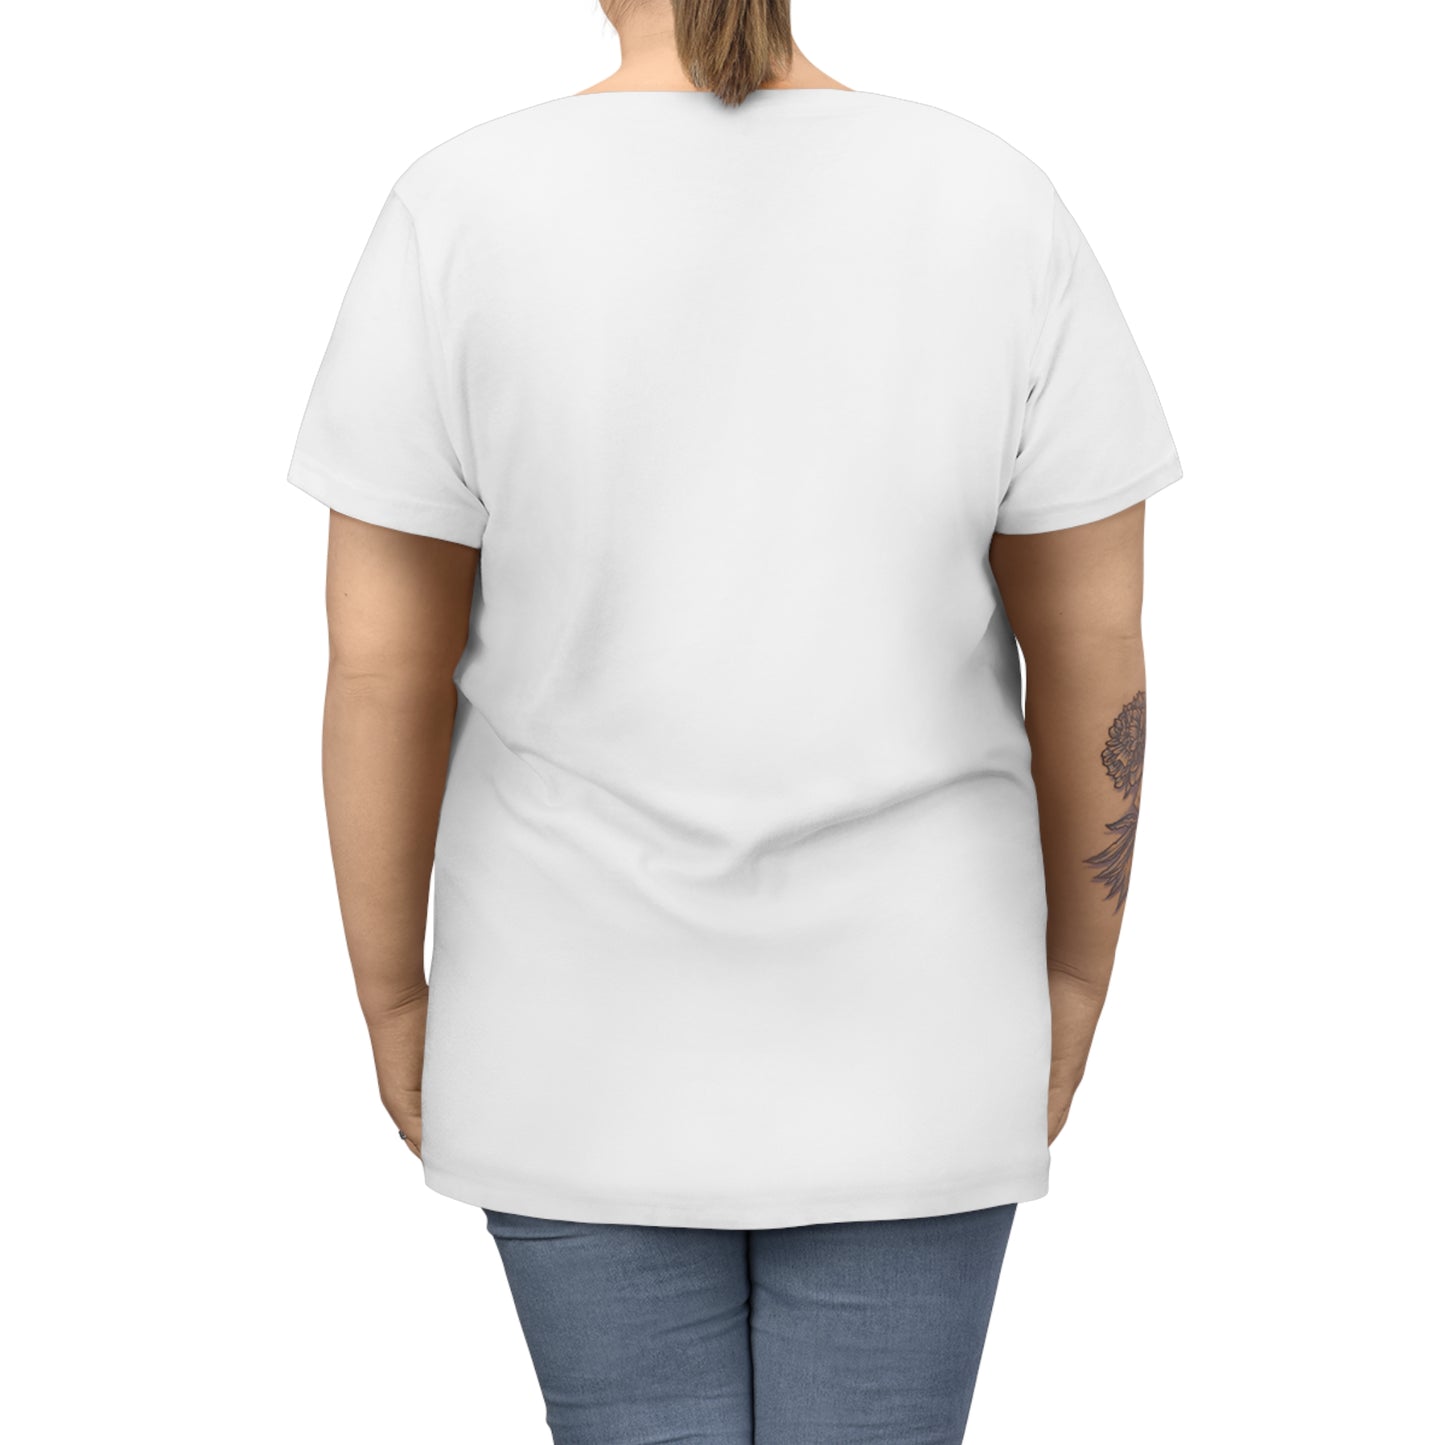 Women's Curvy Tee “I read books and I know things. That’s what I do.”